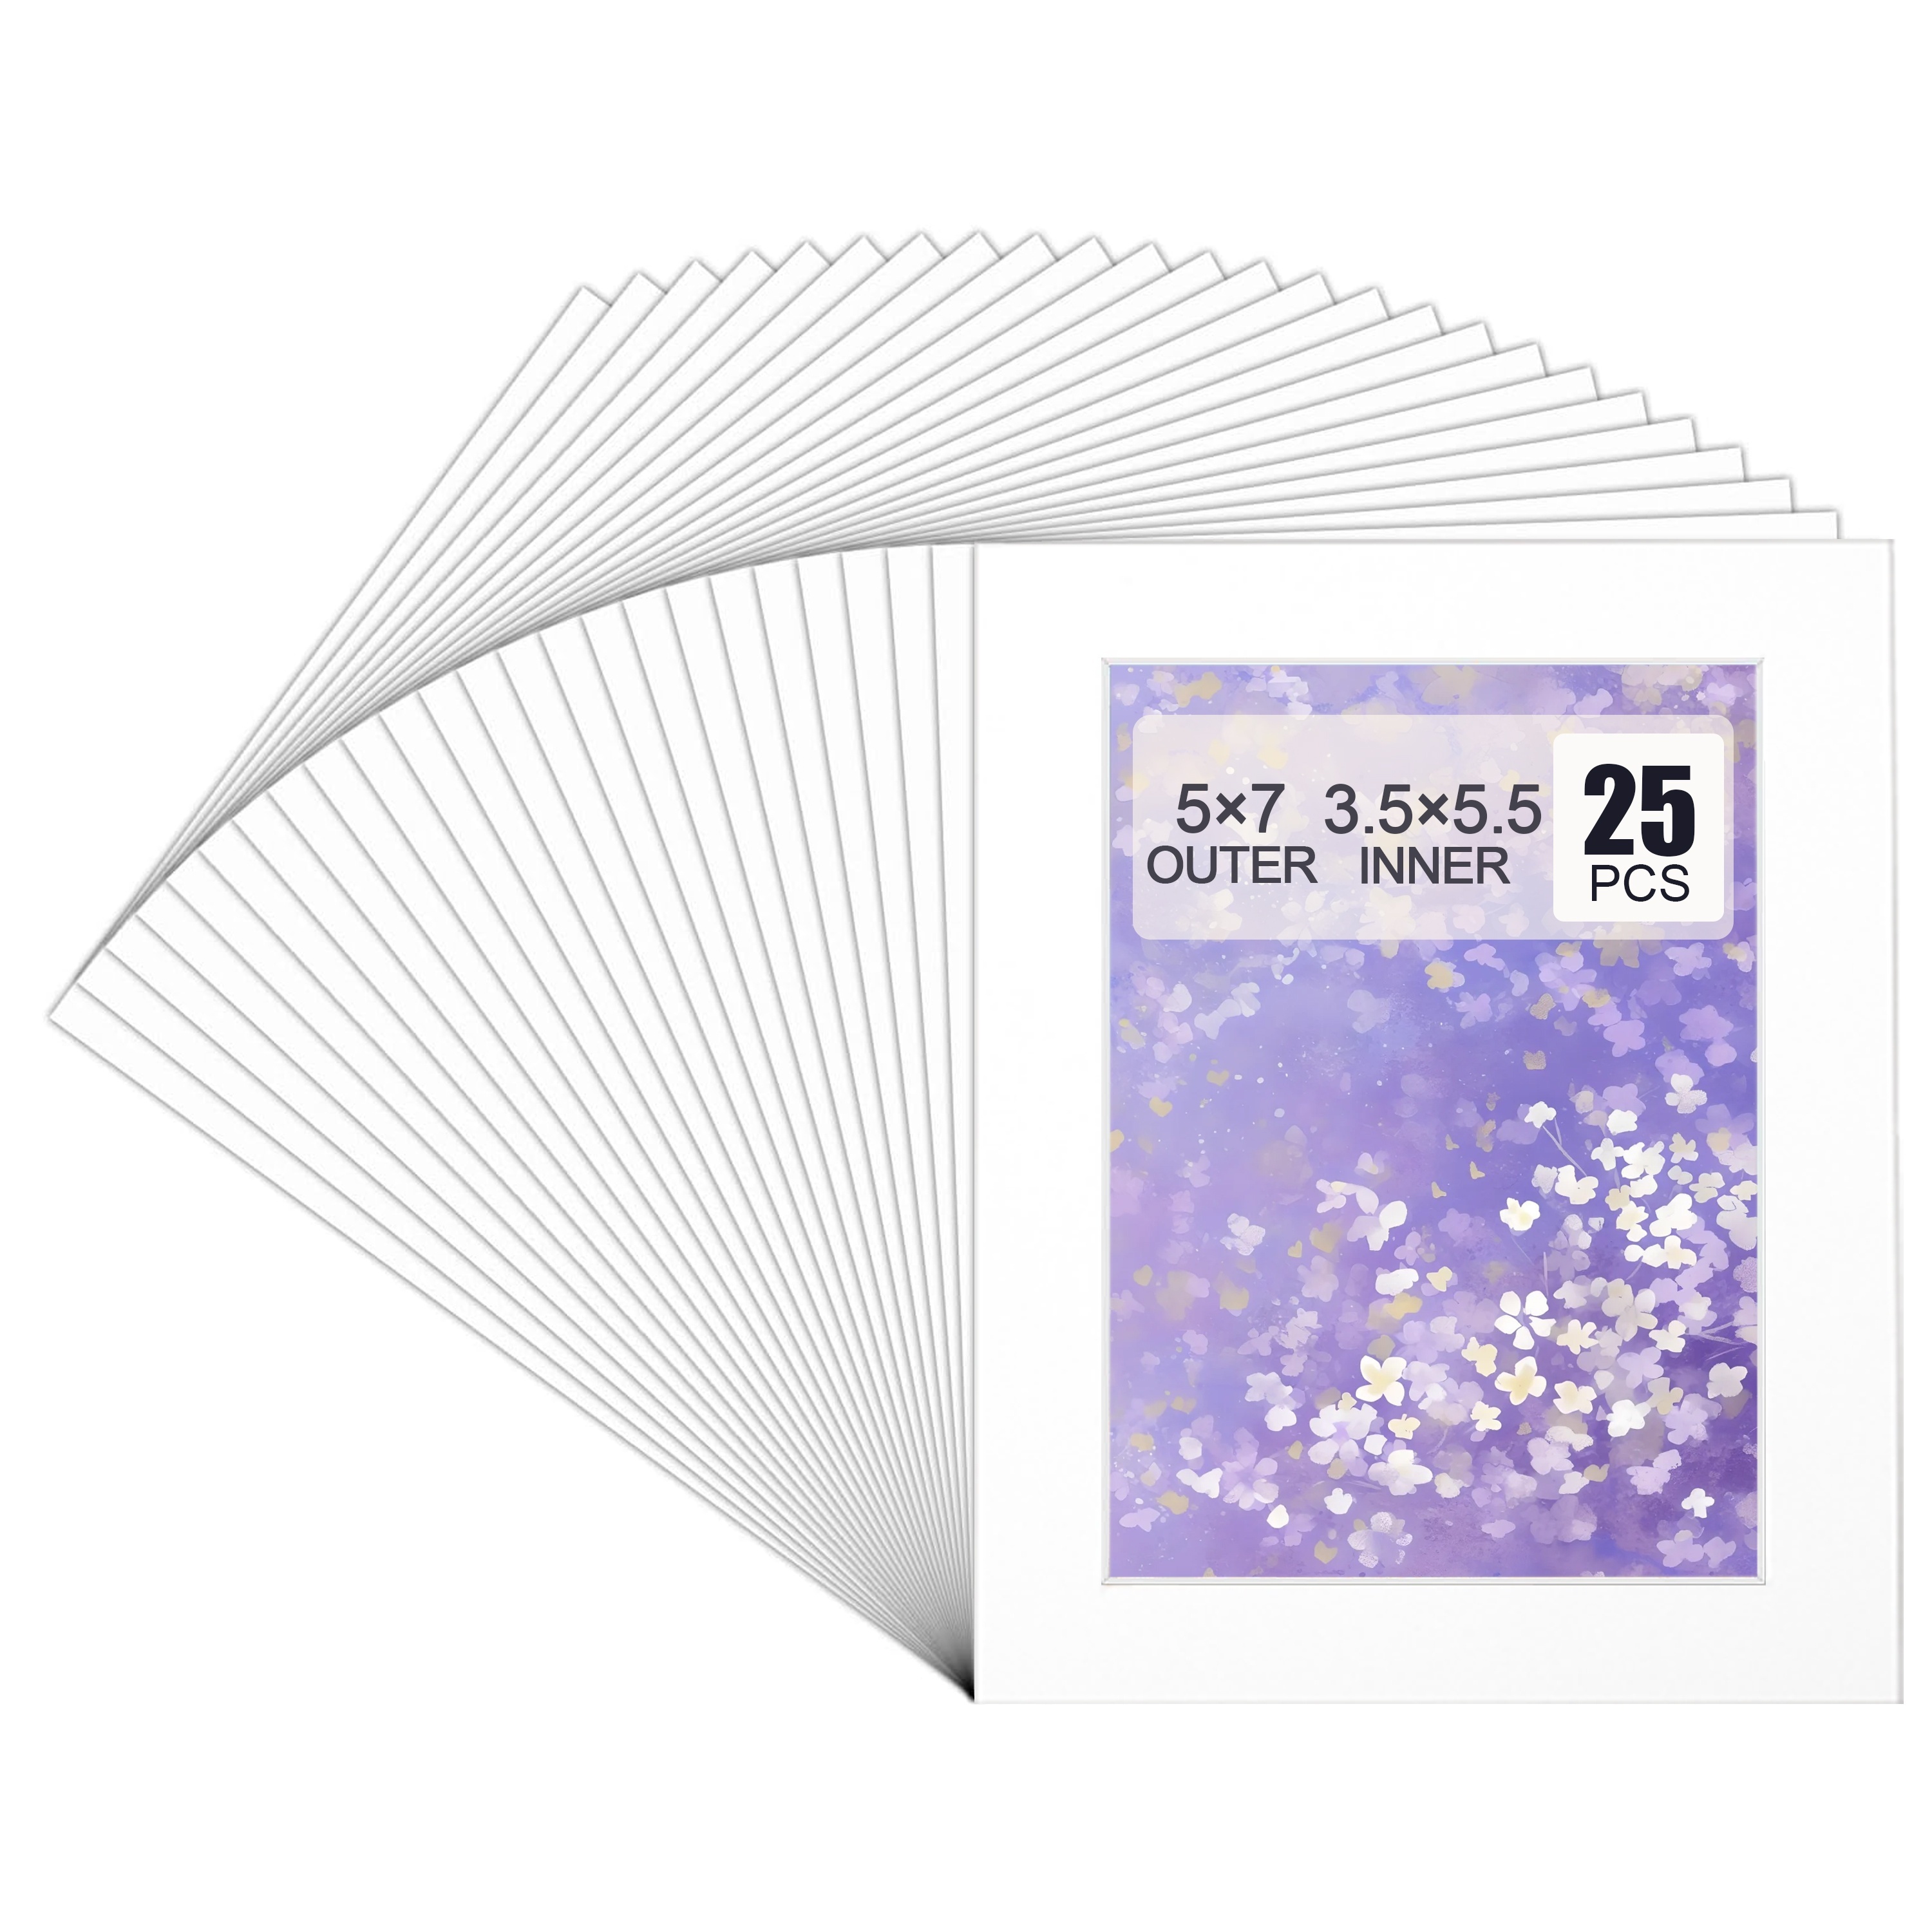 

25-pack White Picture Mats 5x7 Inch - Acid-free, Beveled Edge For Perfect Photo Frames & Art Display, Ideal For Home Decor